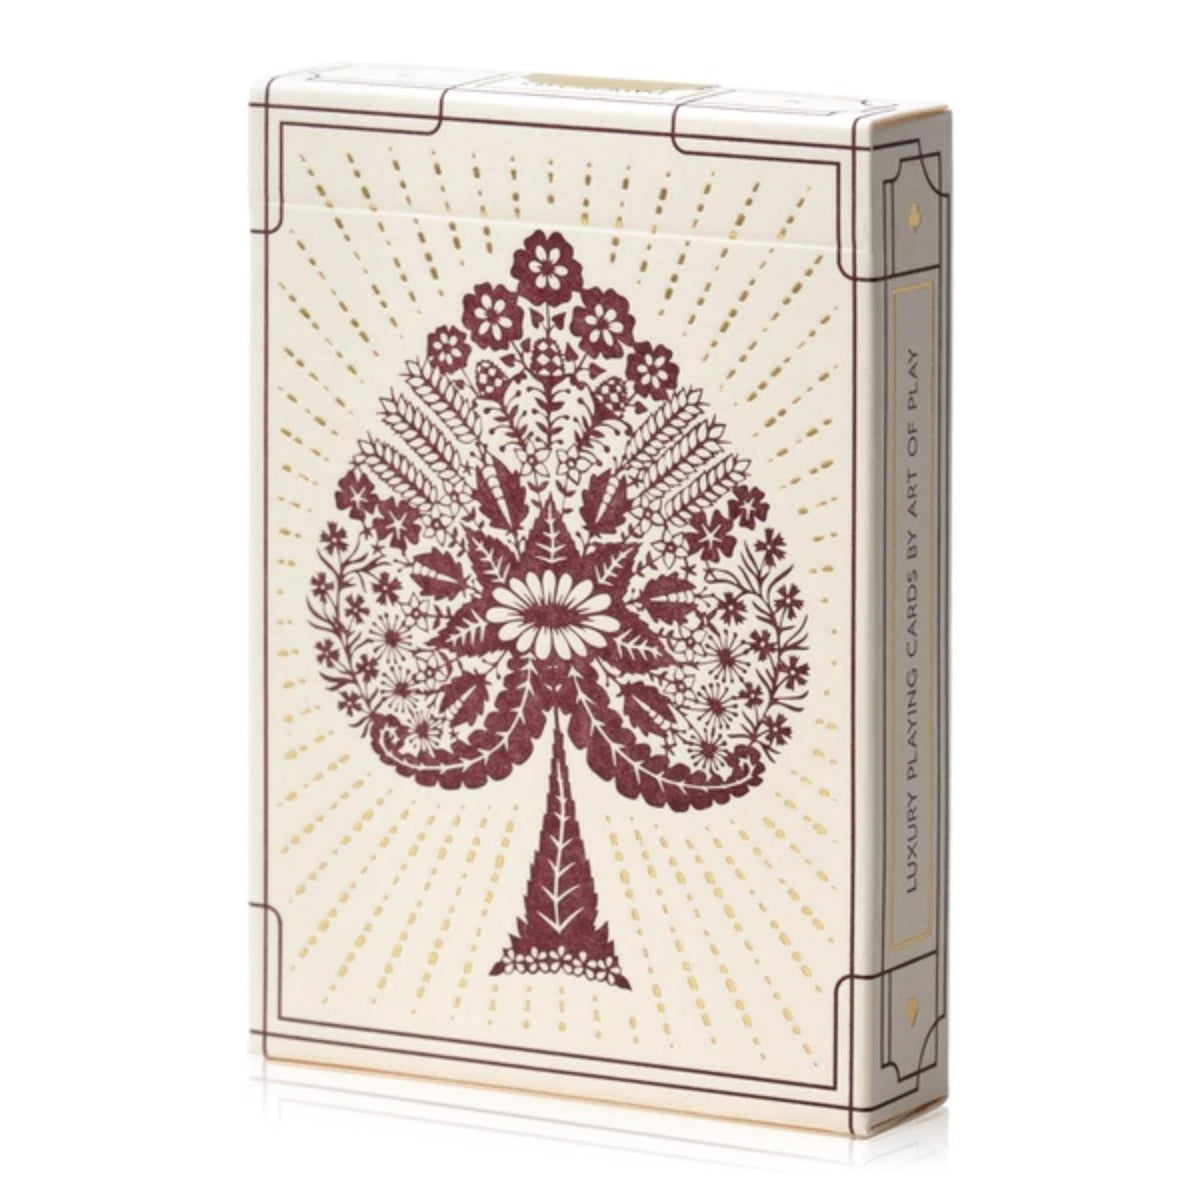 Limited Edition Playing Cards